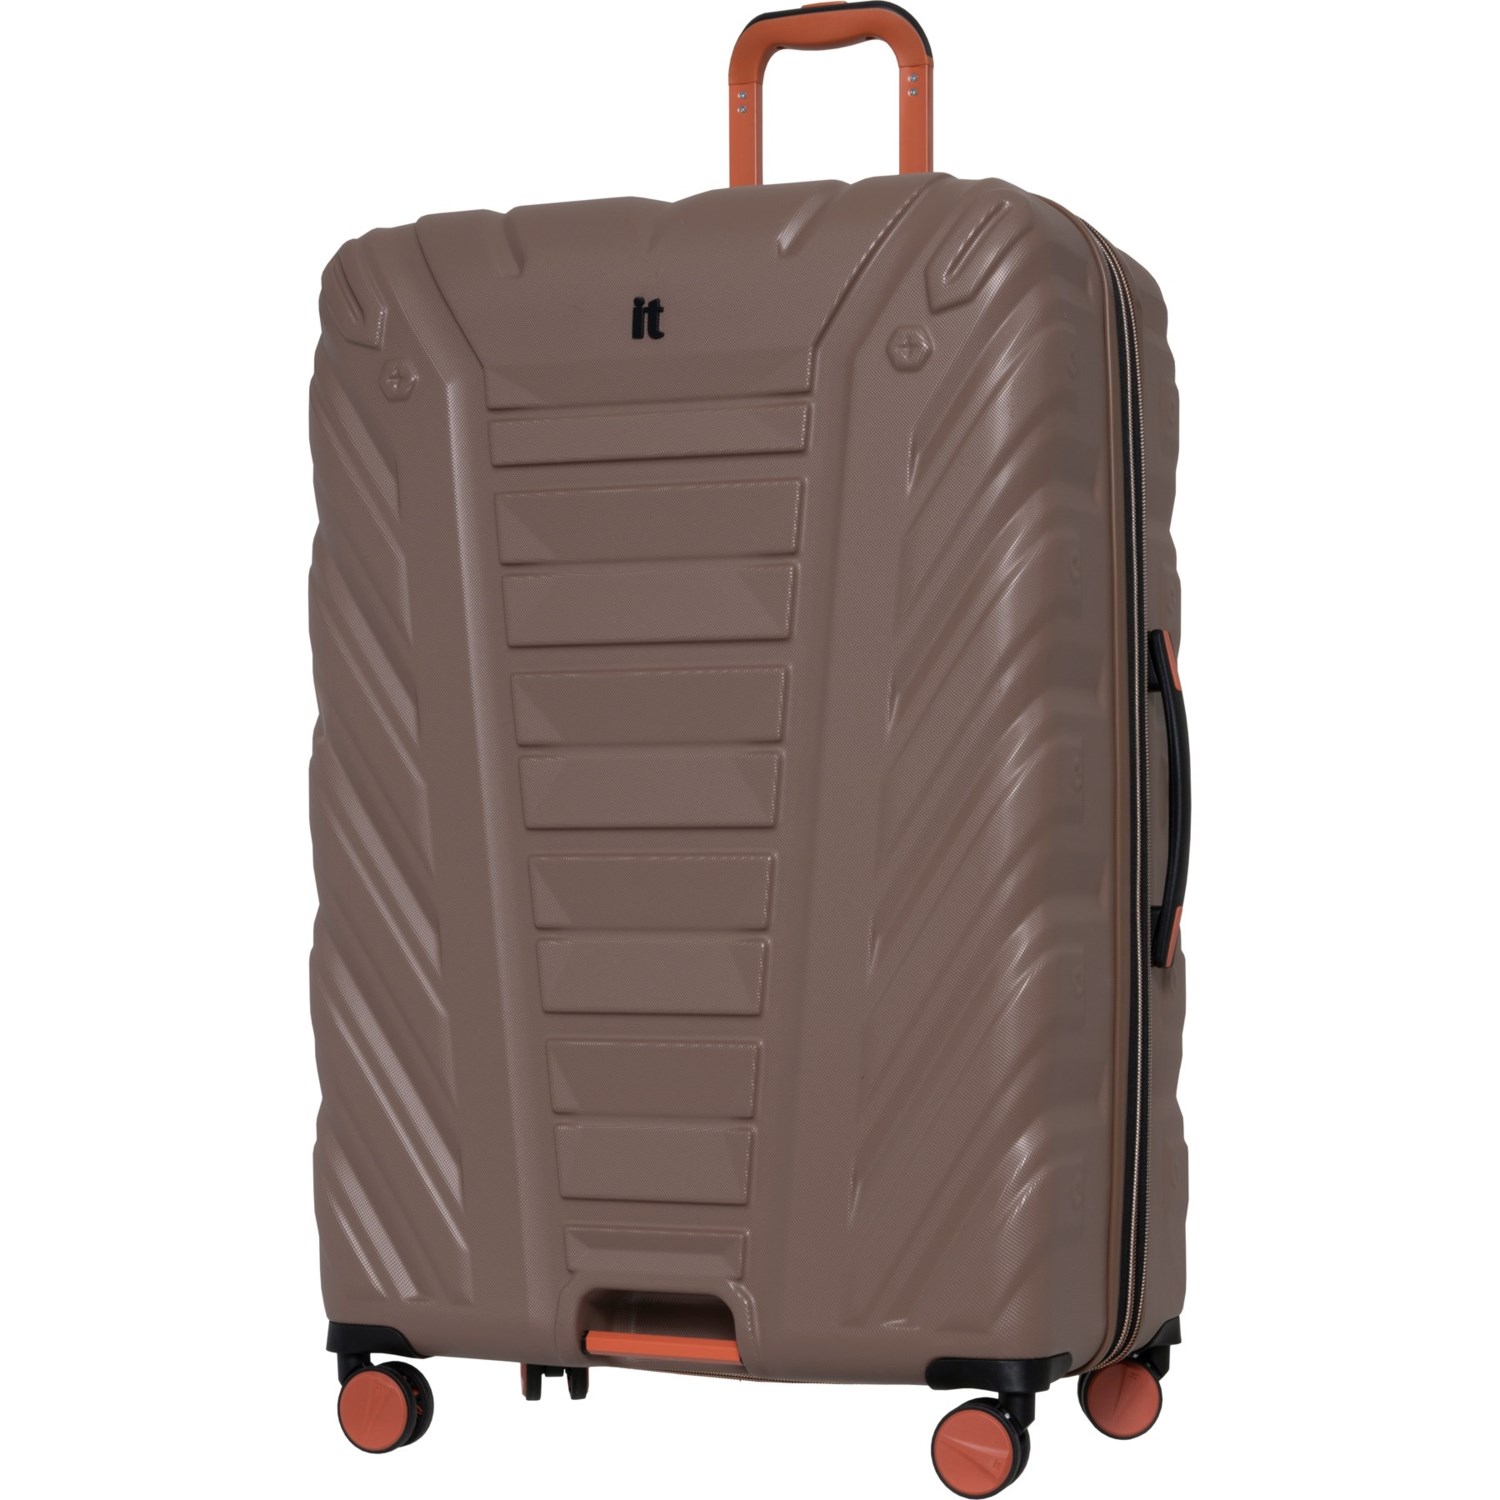 IT Luggage 32.1” Escalate Expedition Spinner Suitcase - Hardside, Expandable, Brownie